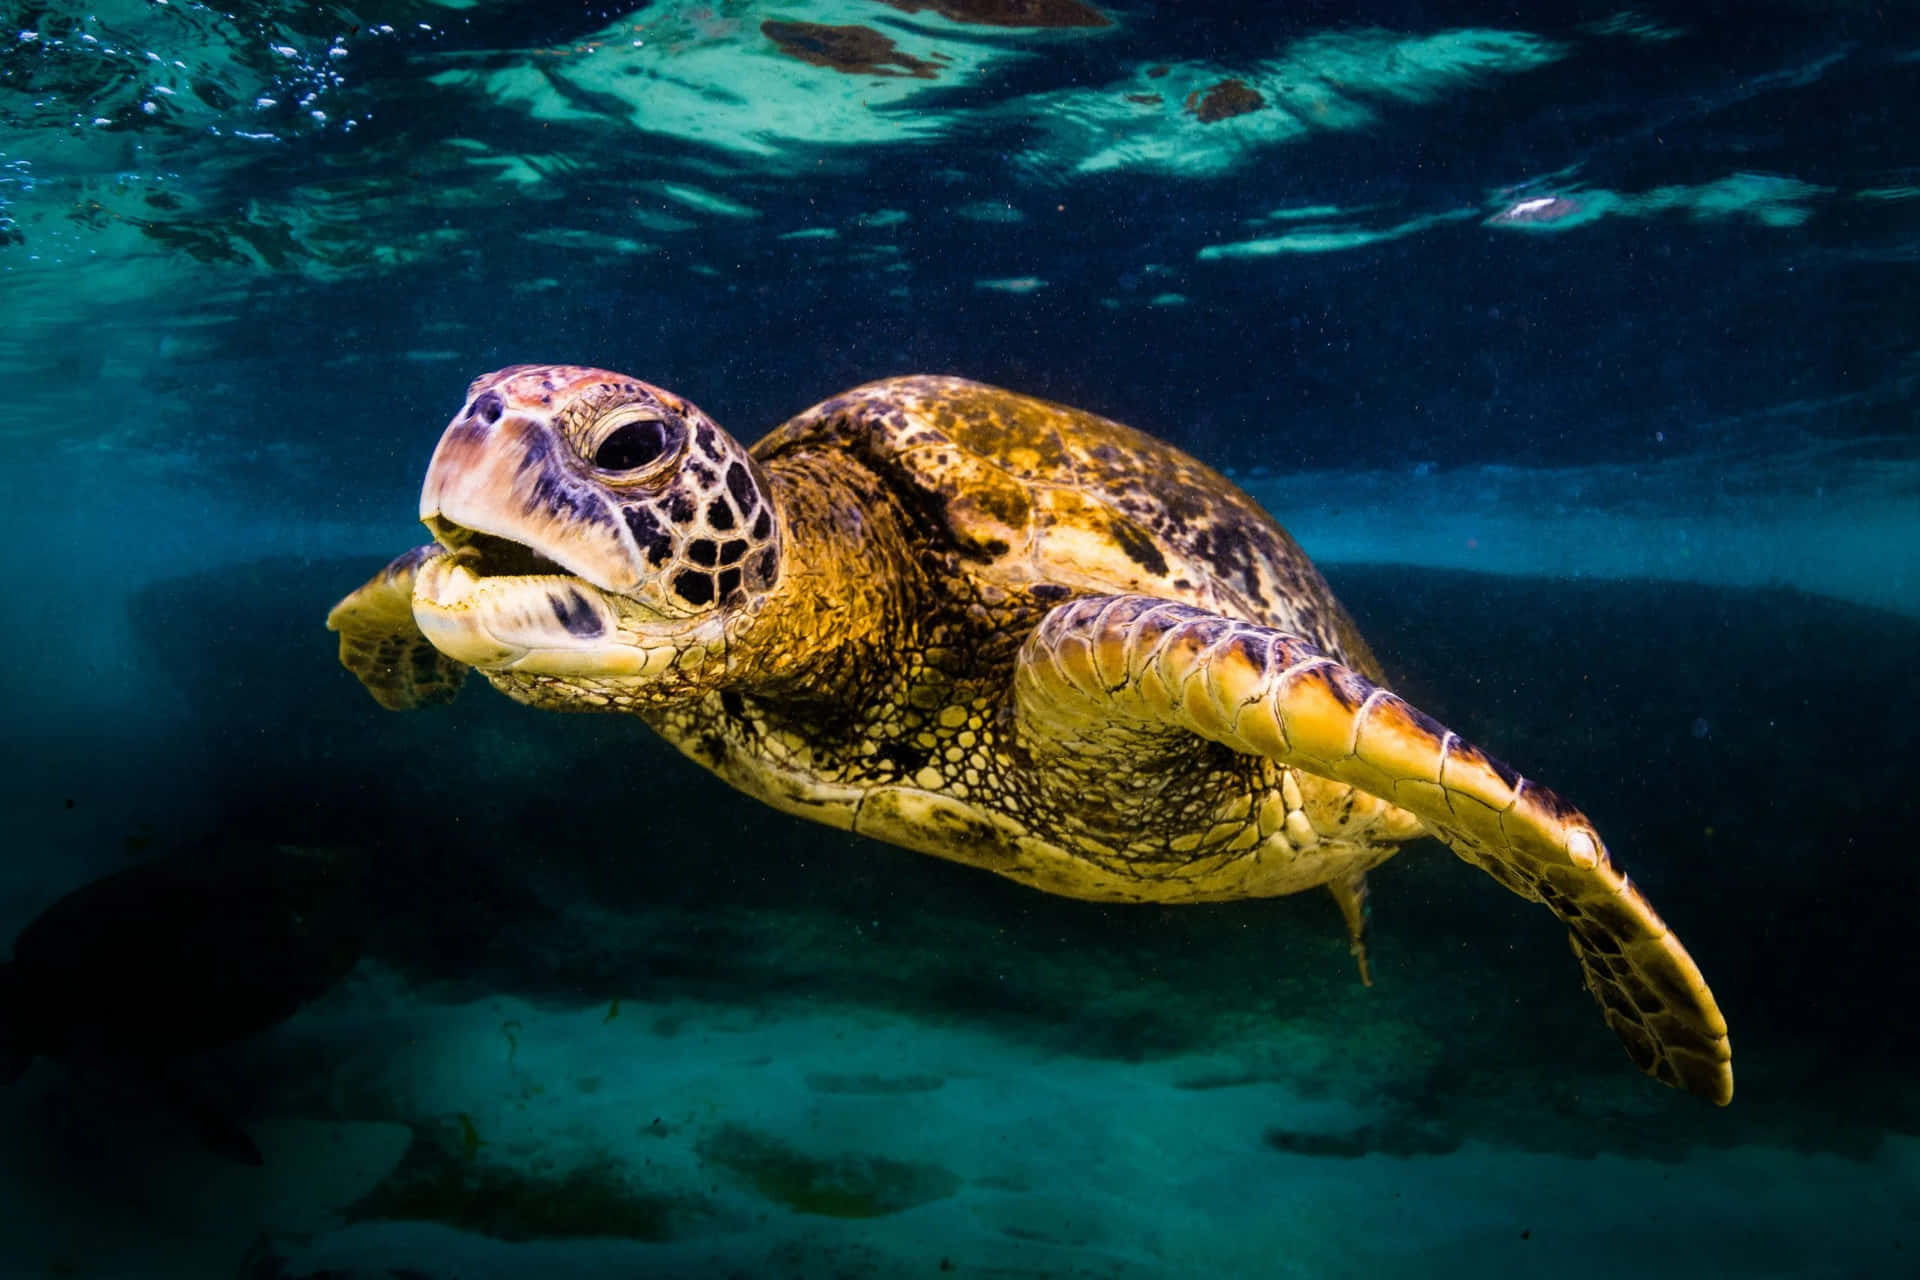 A Green Sea Turtle Swimming In The Ocean